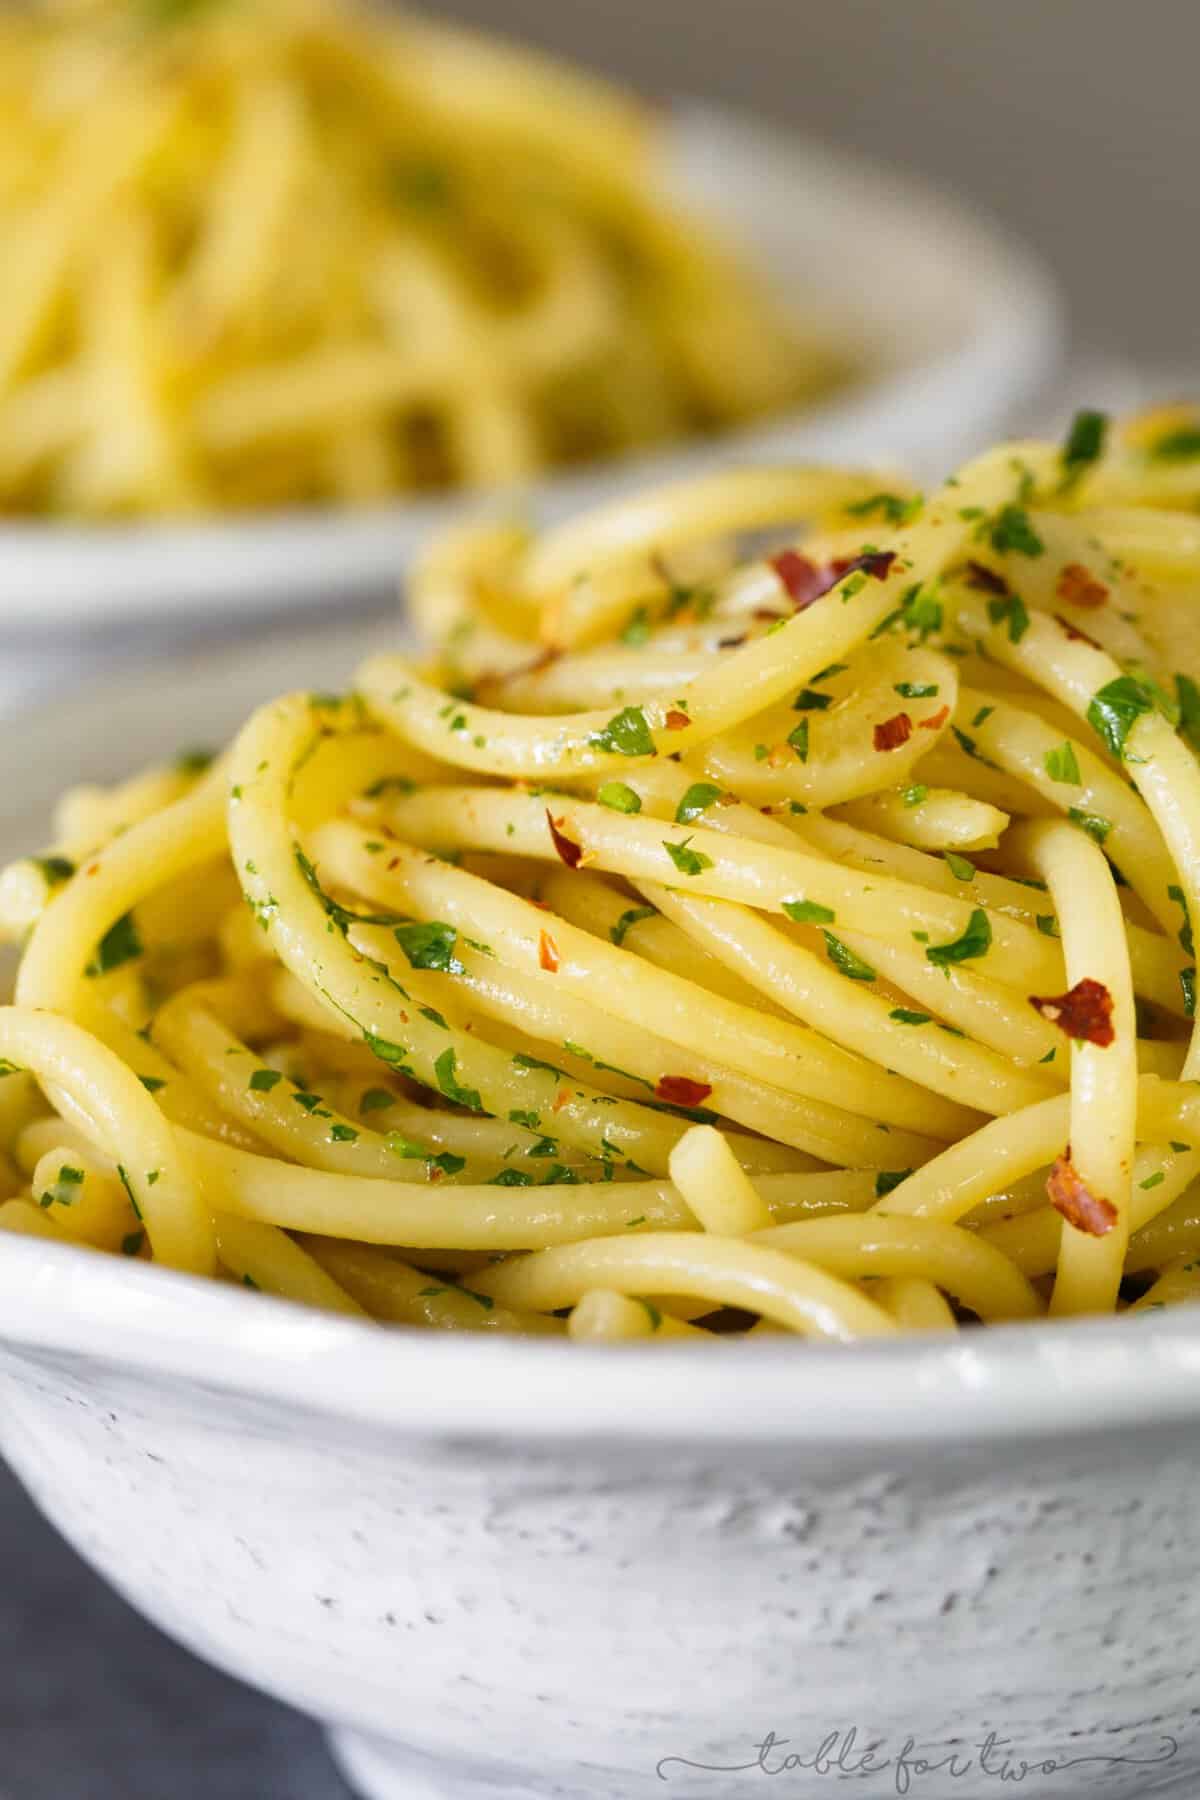 Pasta aglio e olio is a classic Italian pasta dish that has the simplest ingredients but full of big flavor. Incredibly easy to throw together any night of the week when you're craving some light pasta!